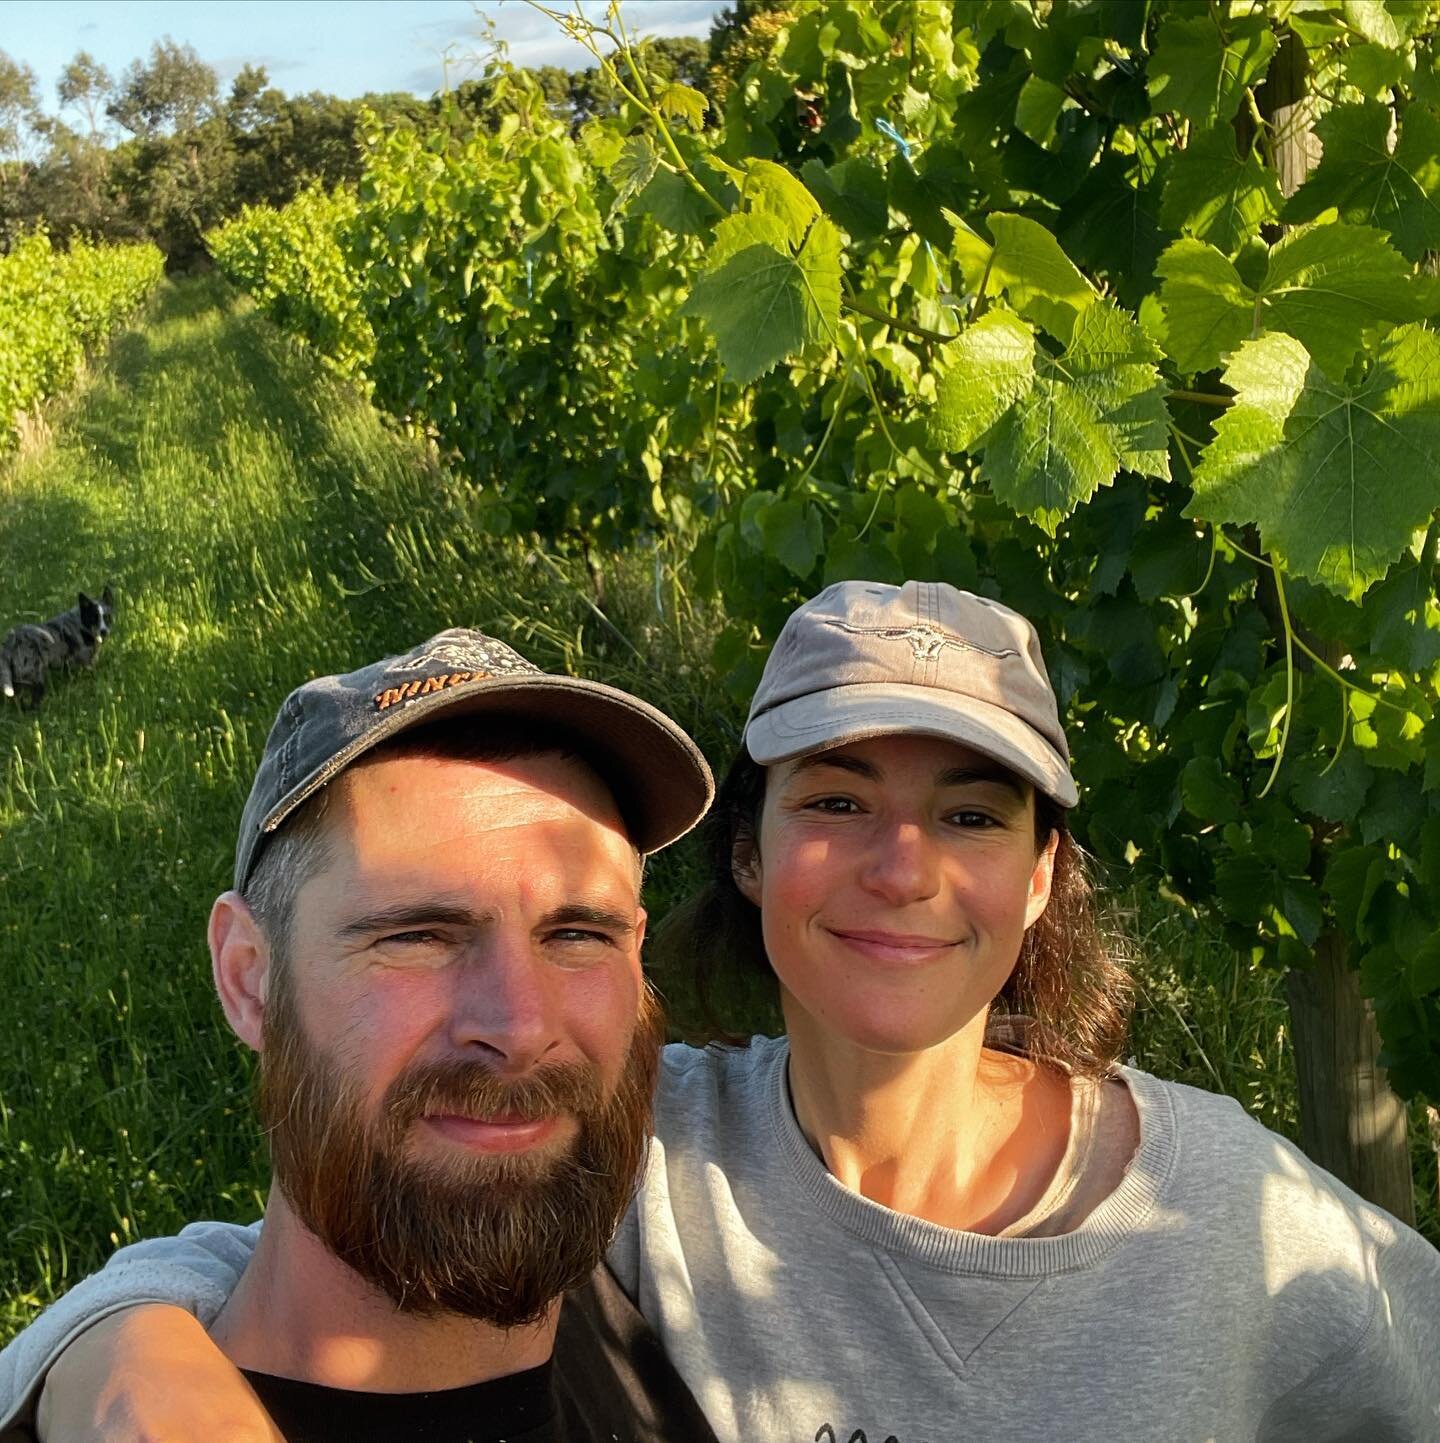 2023 over and out! We just want to say thank you to everyone - to all the beautiful relationships we&rsquo;ve built over the last twelve months on this wild journey. It&rsquo;s been so humbling to hear that people have been enjoying the wines and tha